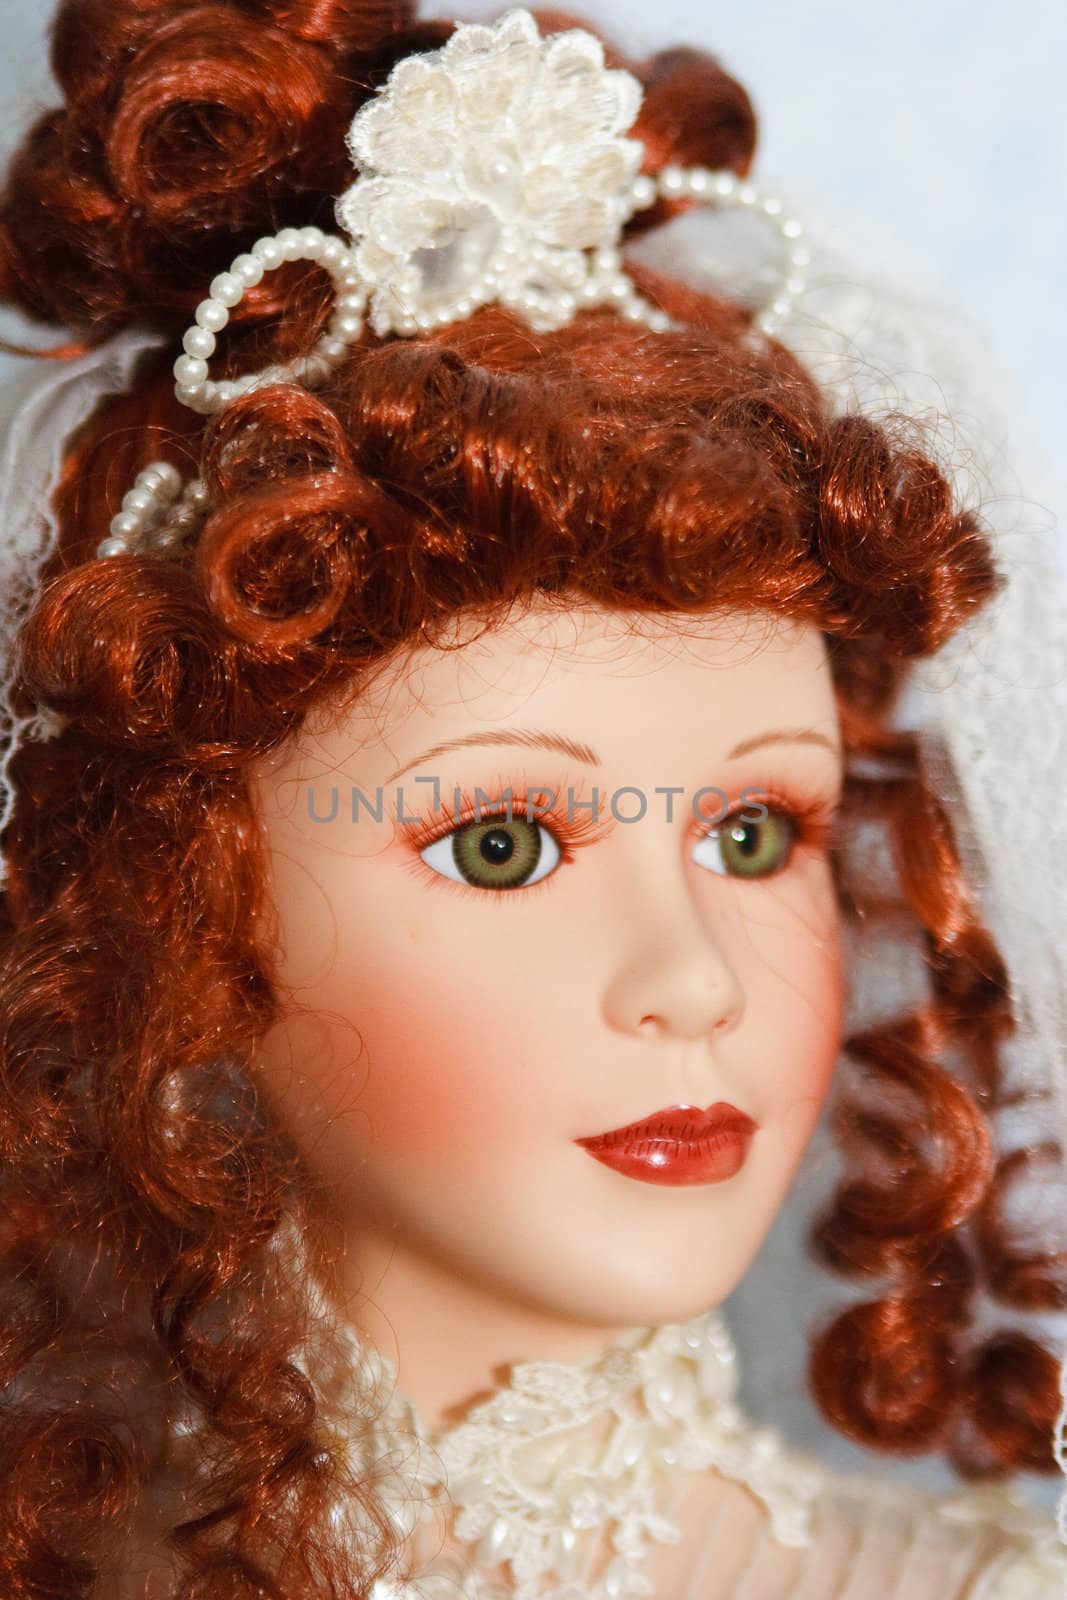 A close up of a young innocent doll face